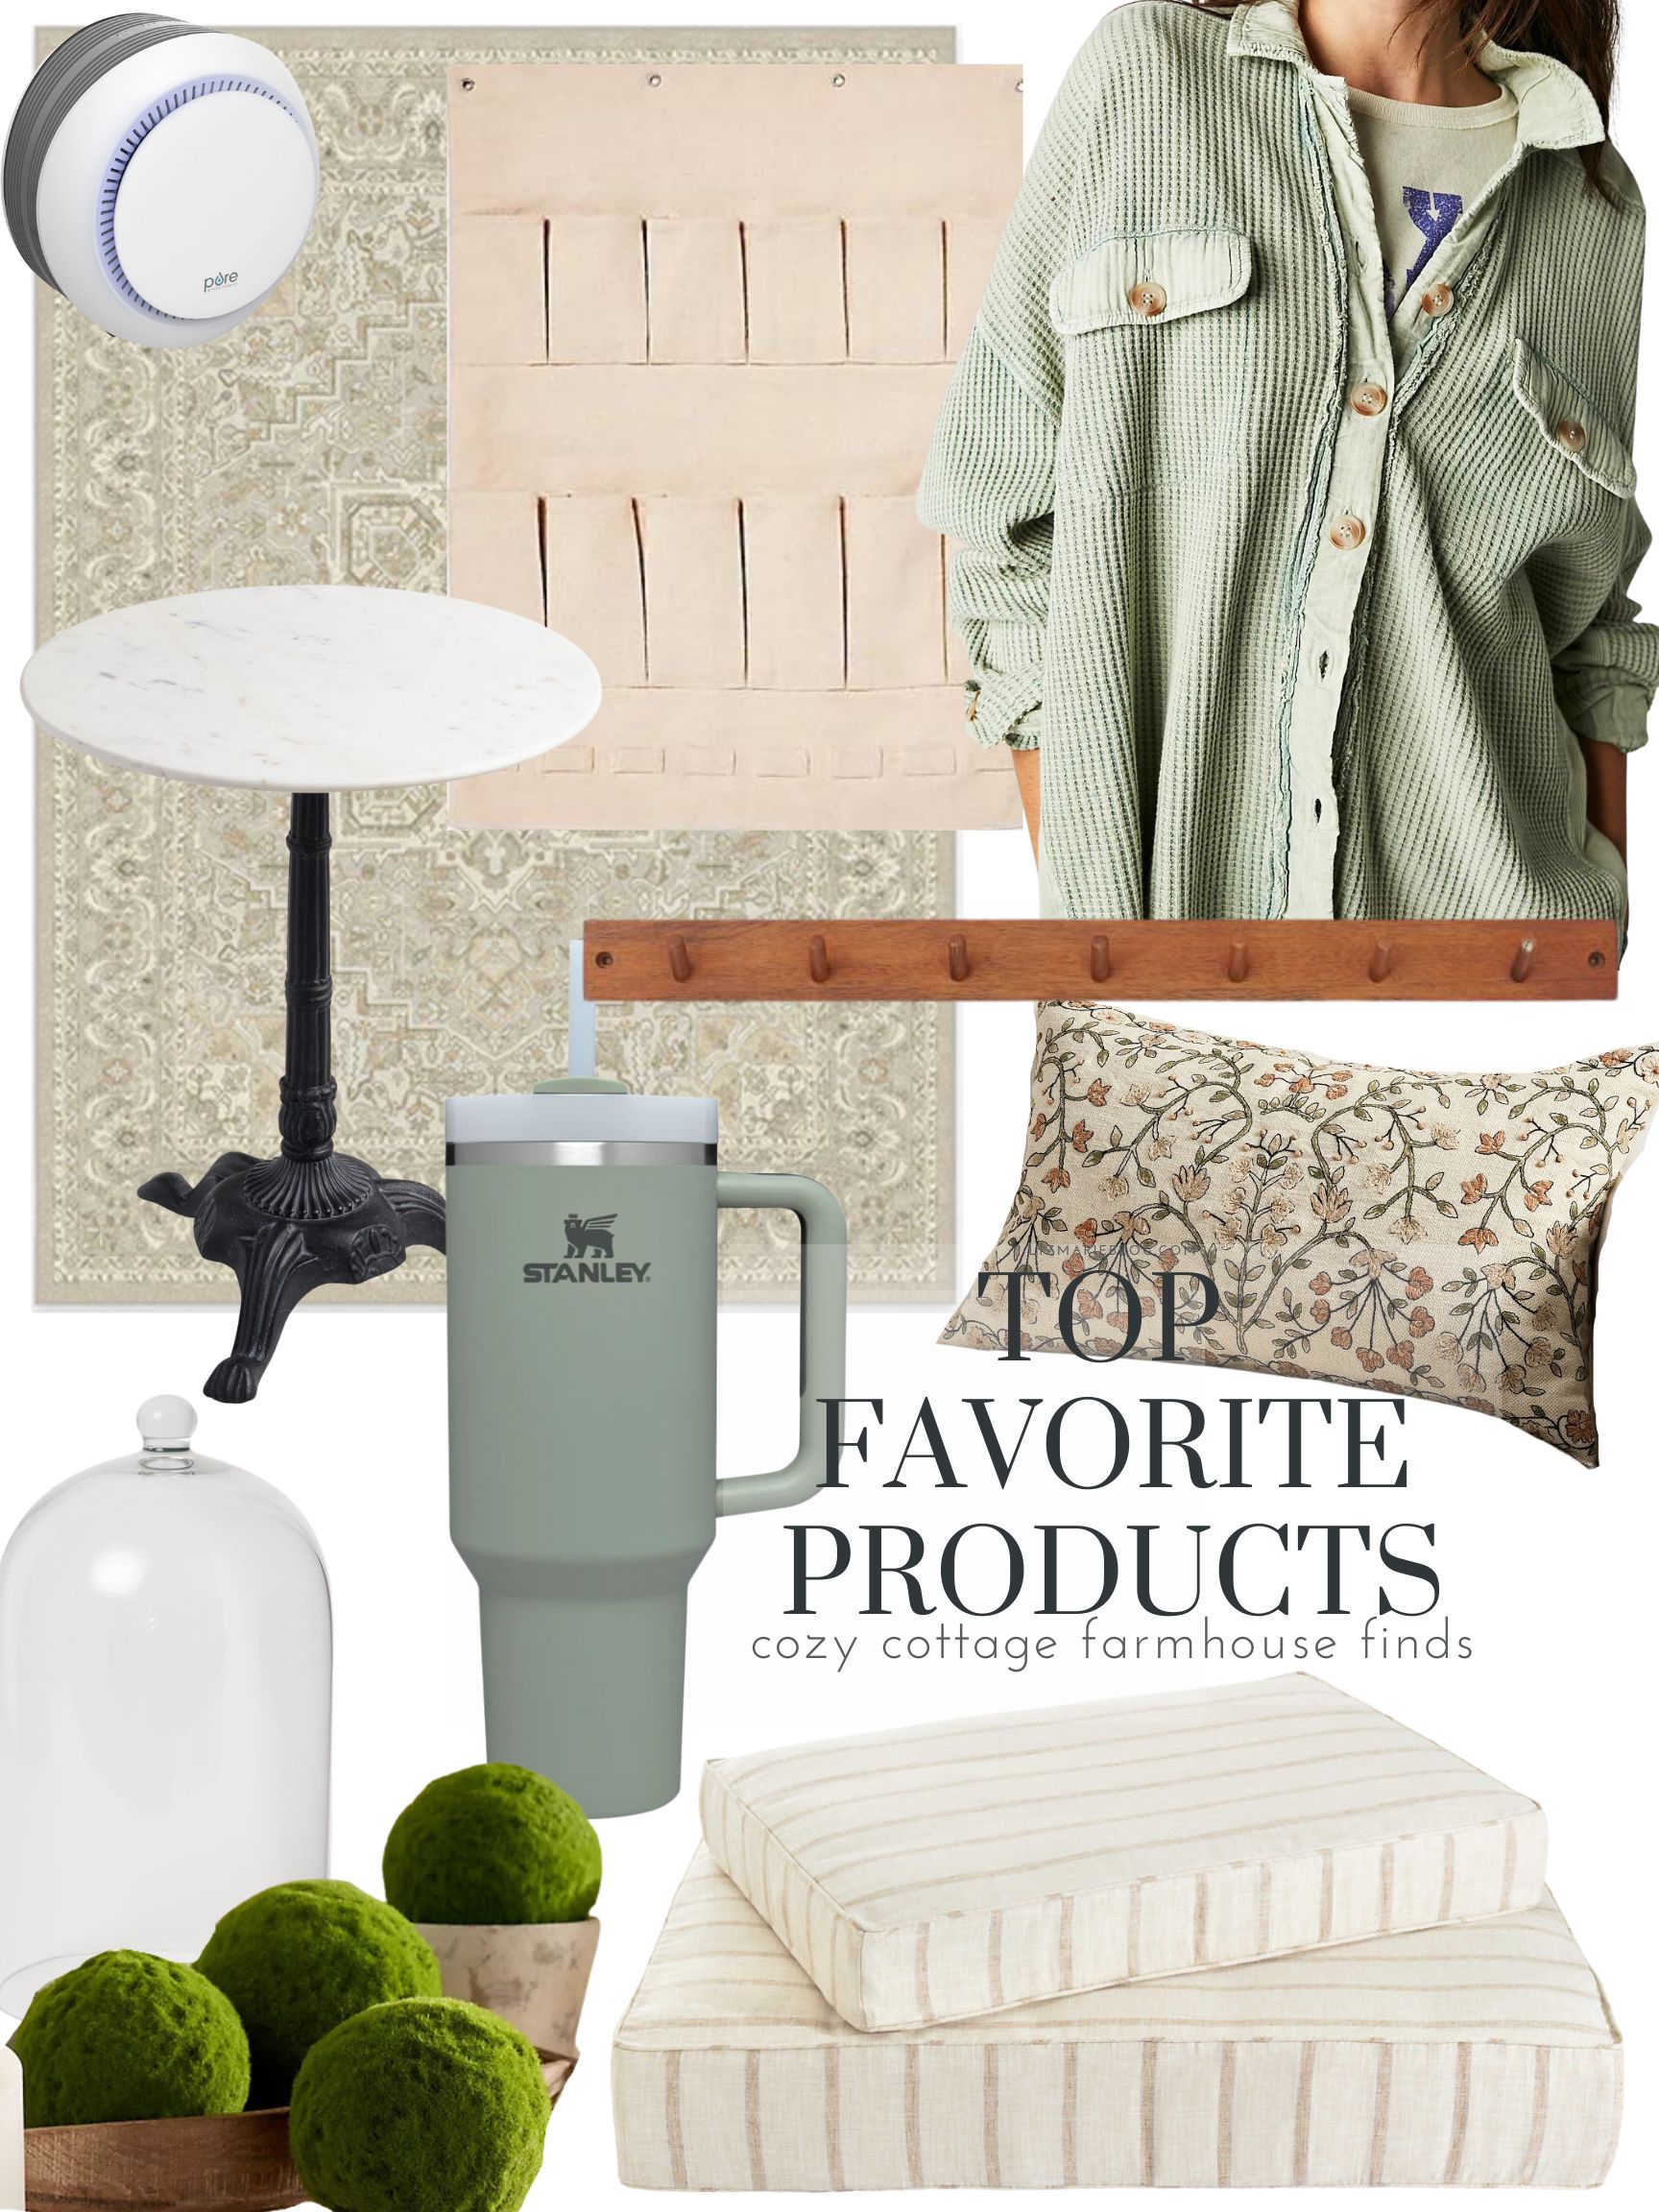 Top Favorite Products – Cozy Lifestyle Finds